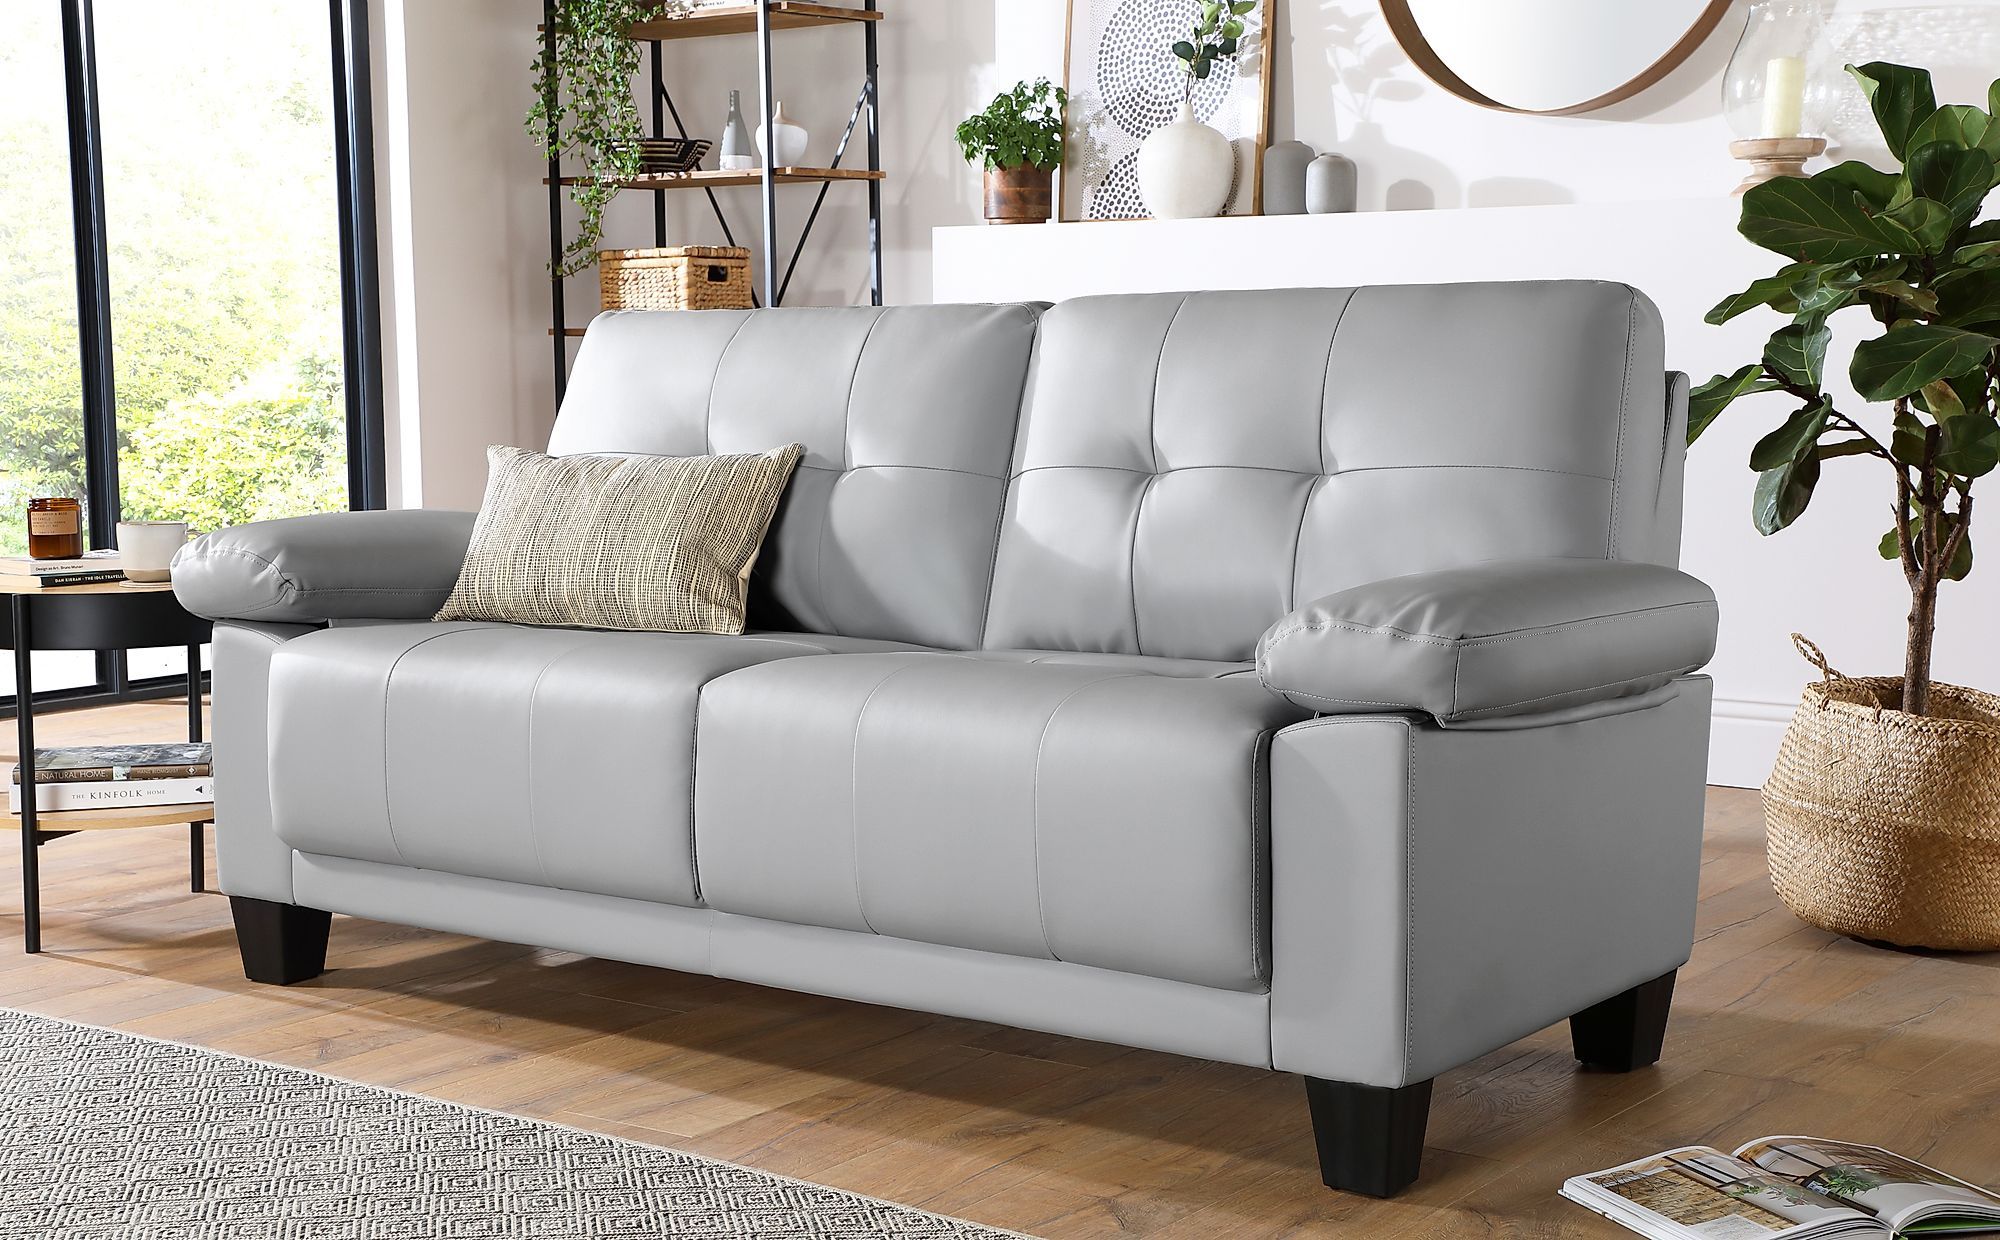 Linton Small Light Grey Leather 3 Seater Sofa | Furniture Choice Throughout Sofas In Light Grey (Gallery 17 of 20)